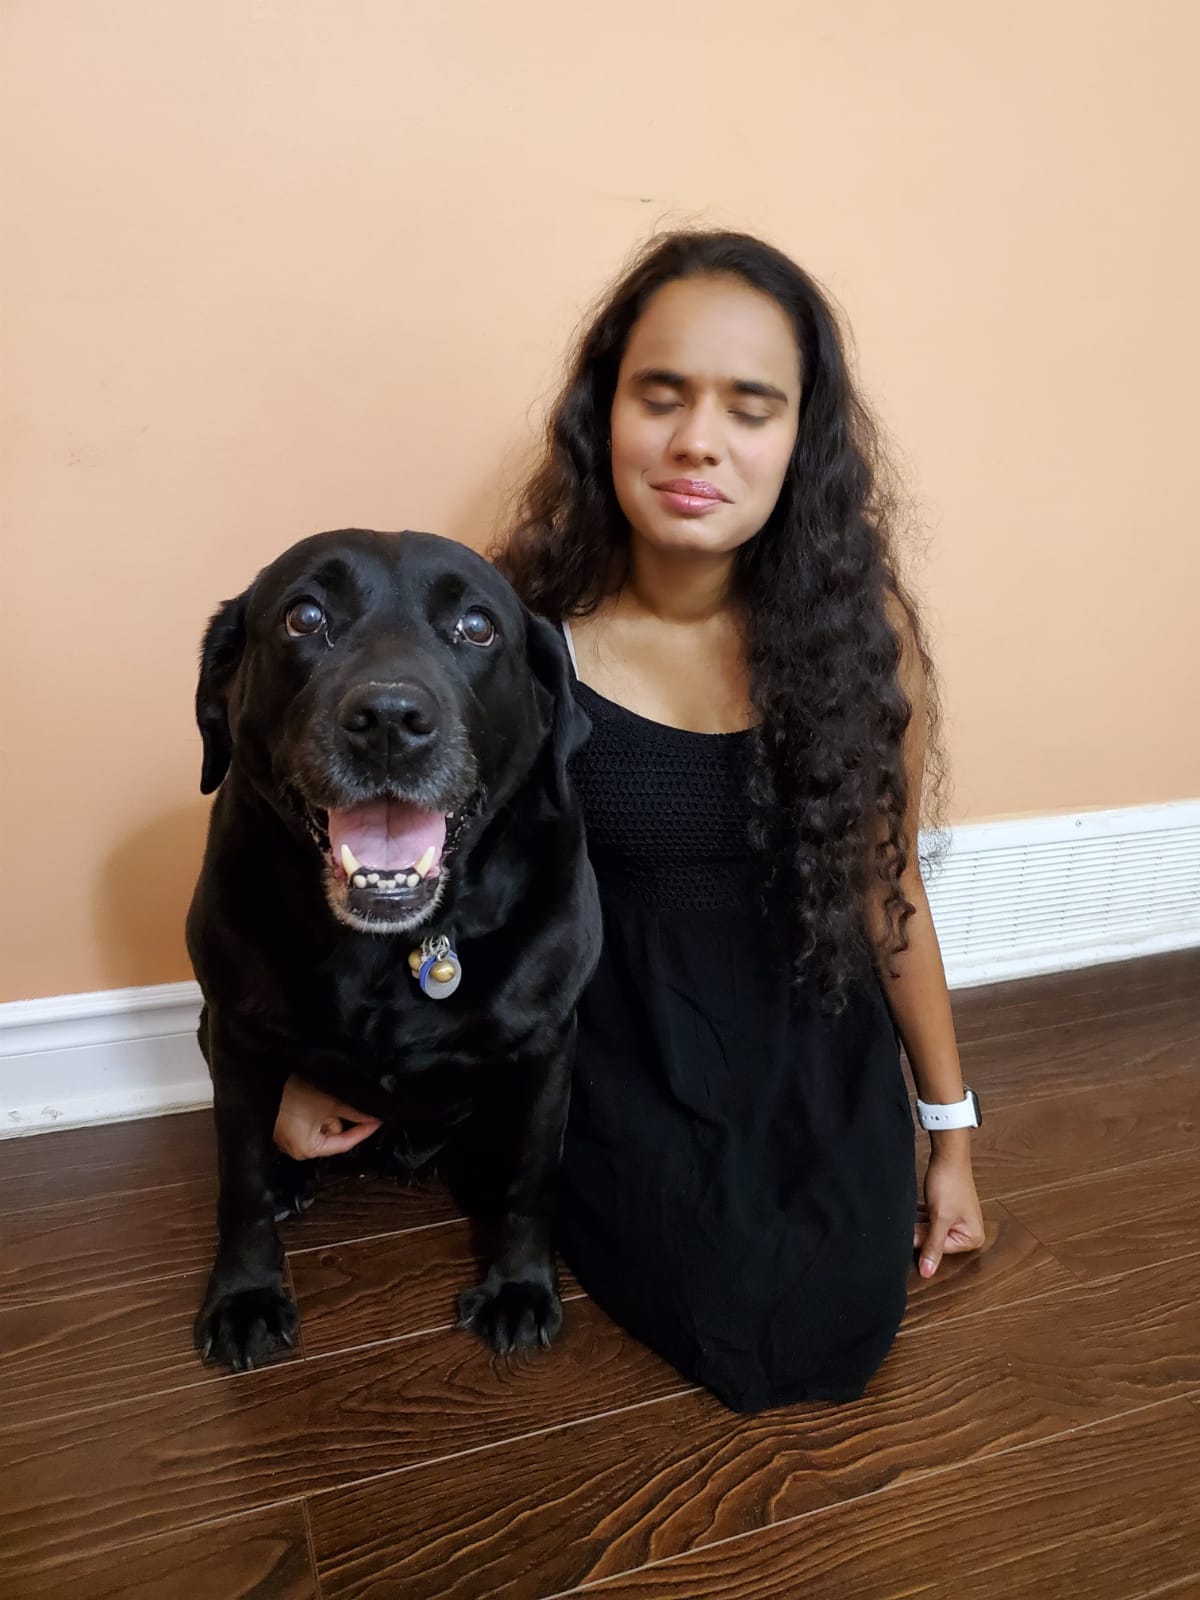 Runa Patel, kneeling on the floor next to her guide dog, smiling for the camera.